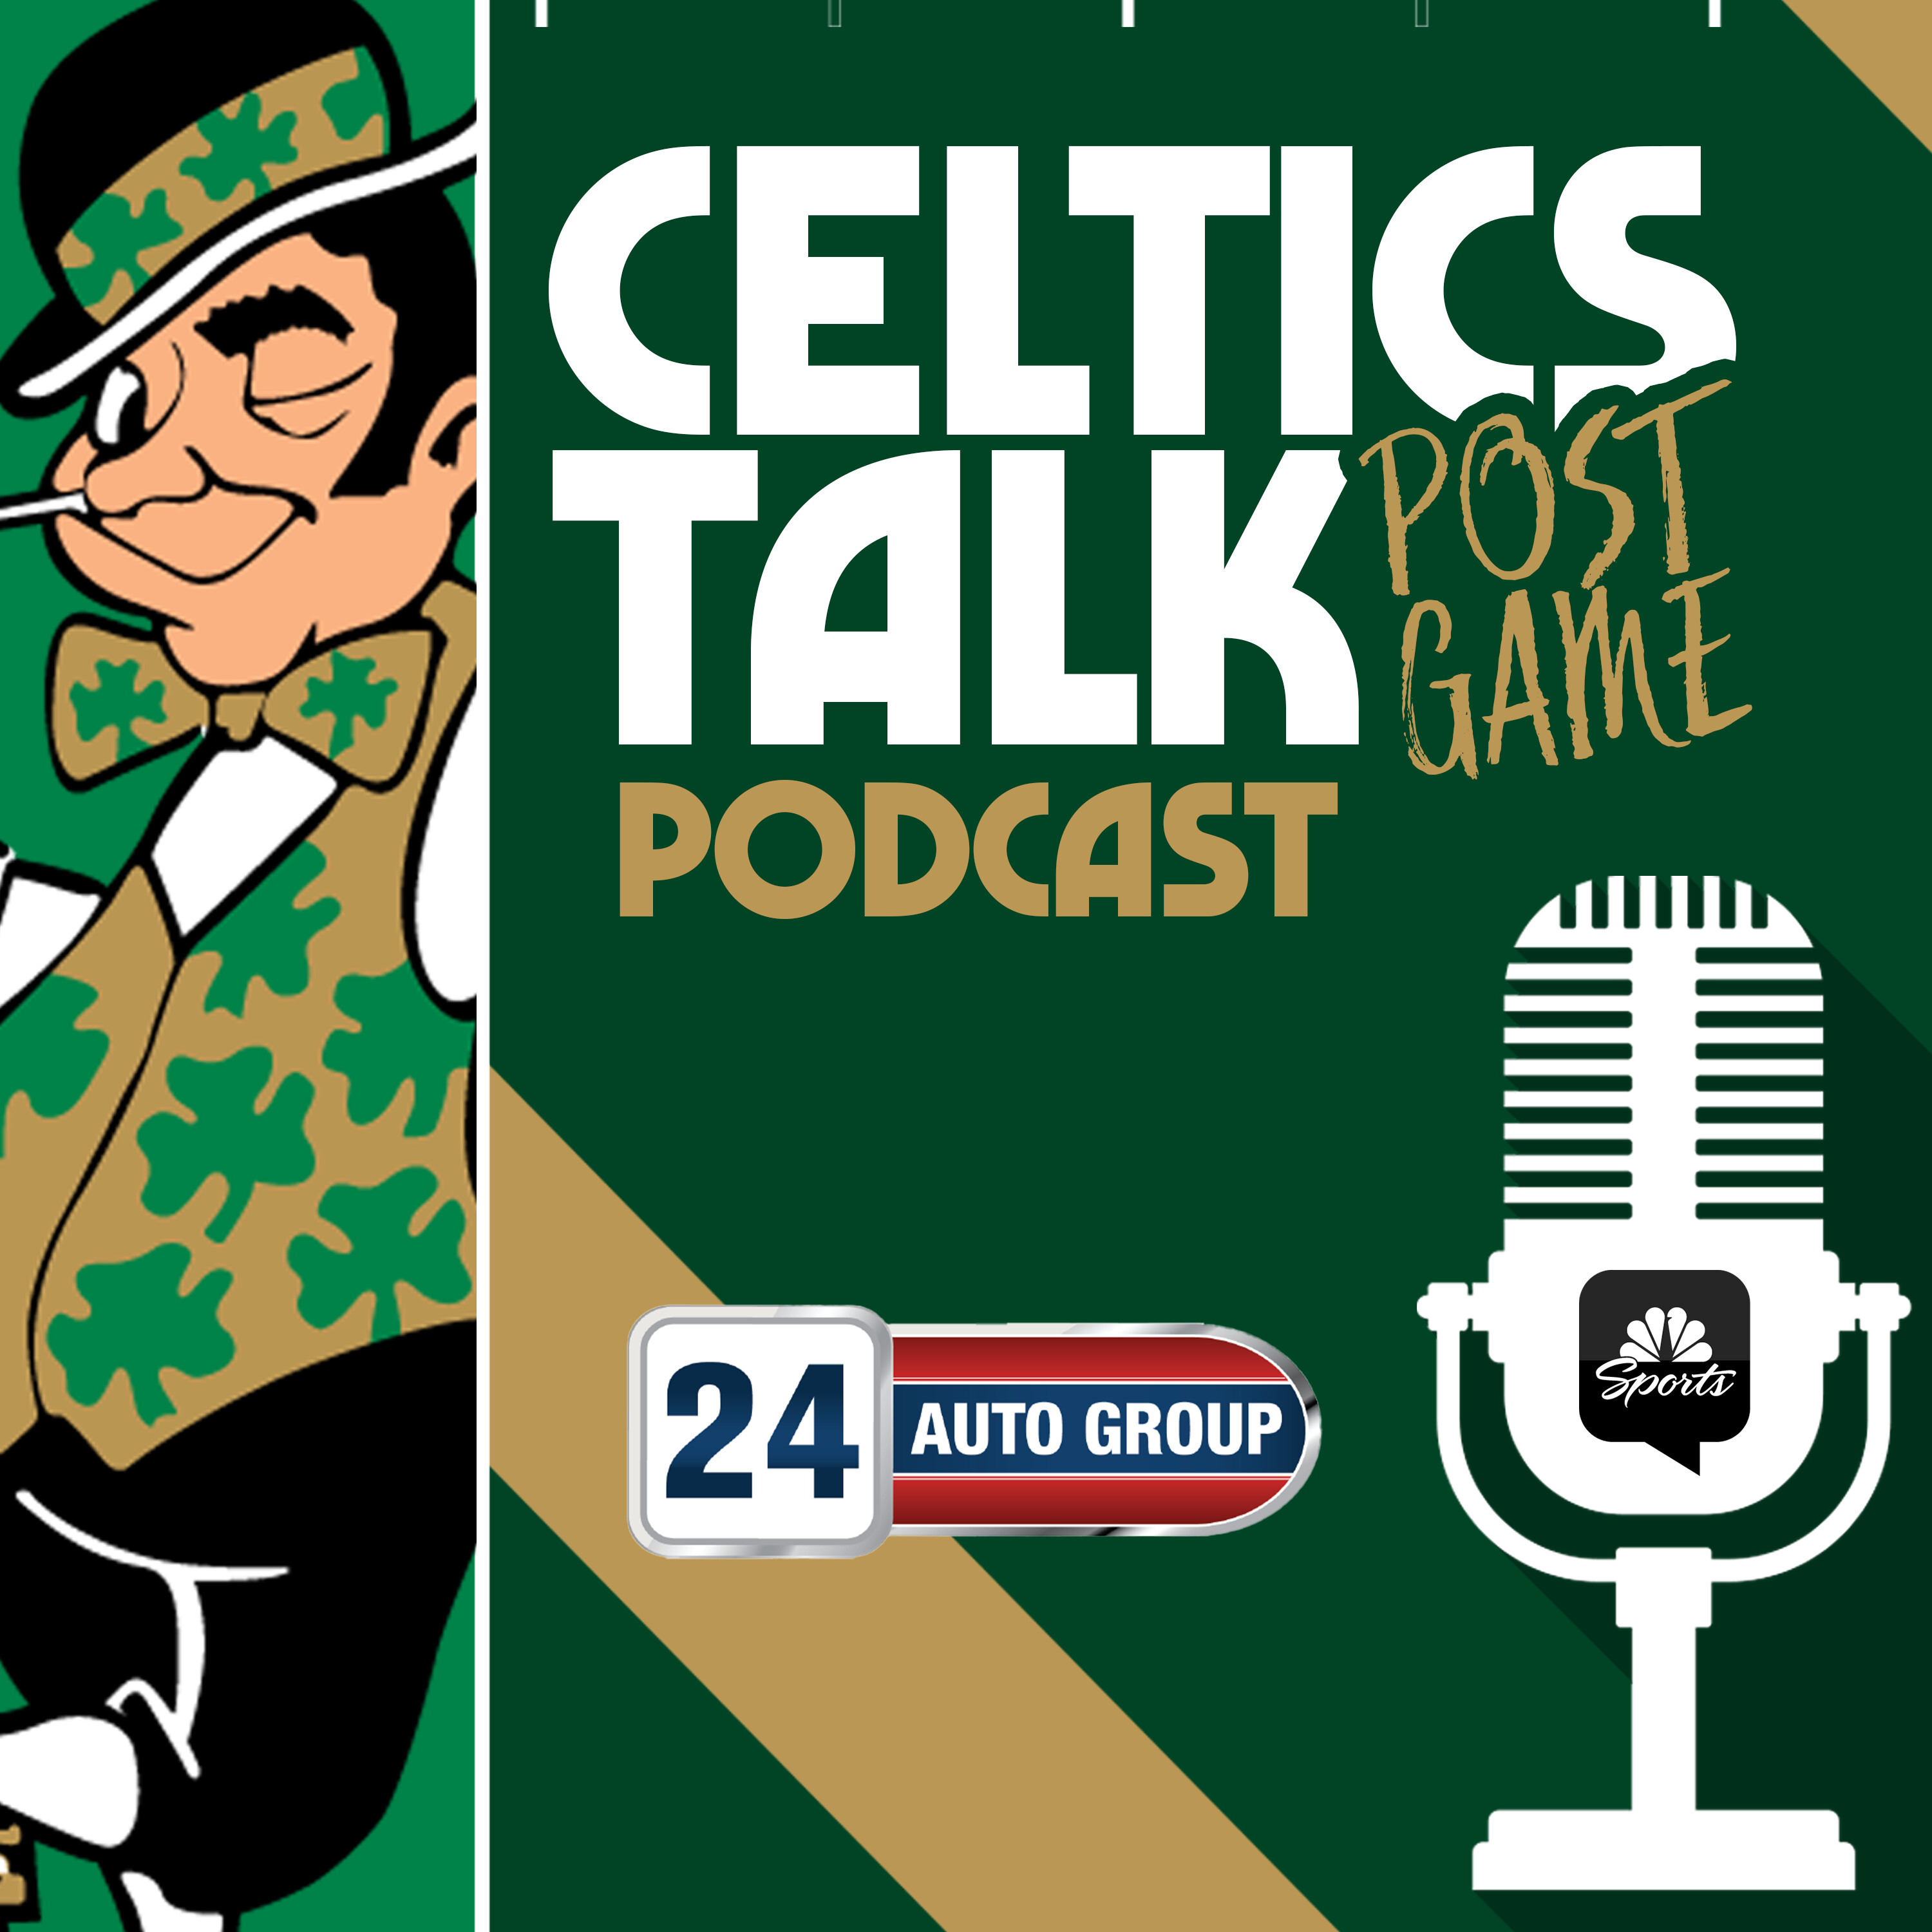 POSTGAME POD: Celtics 'avenge' Eastern Conference Finals Game 7 loss with gutsy win over Heat